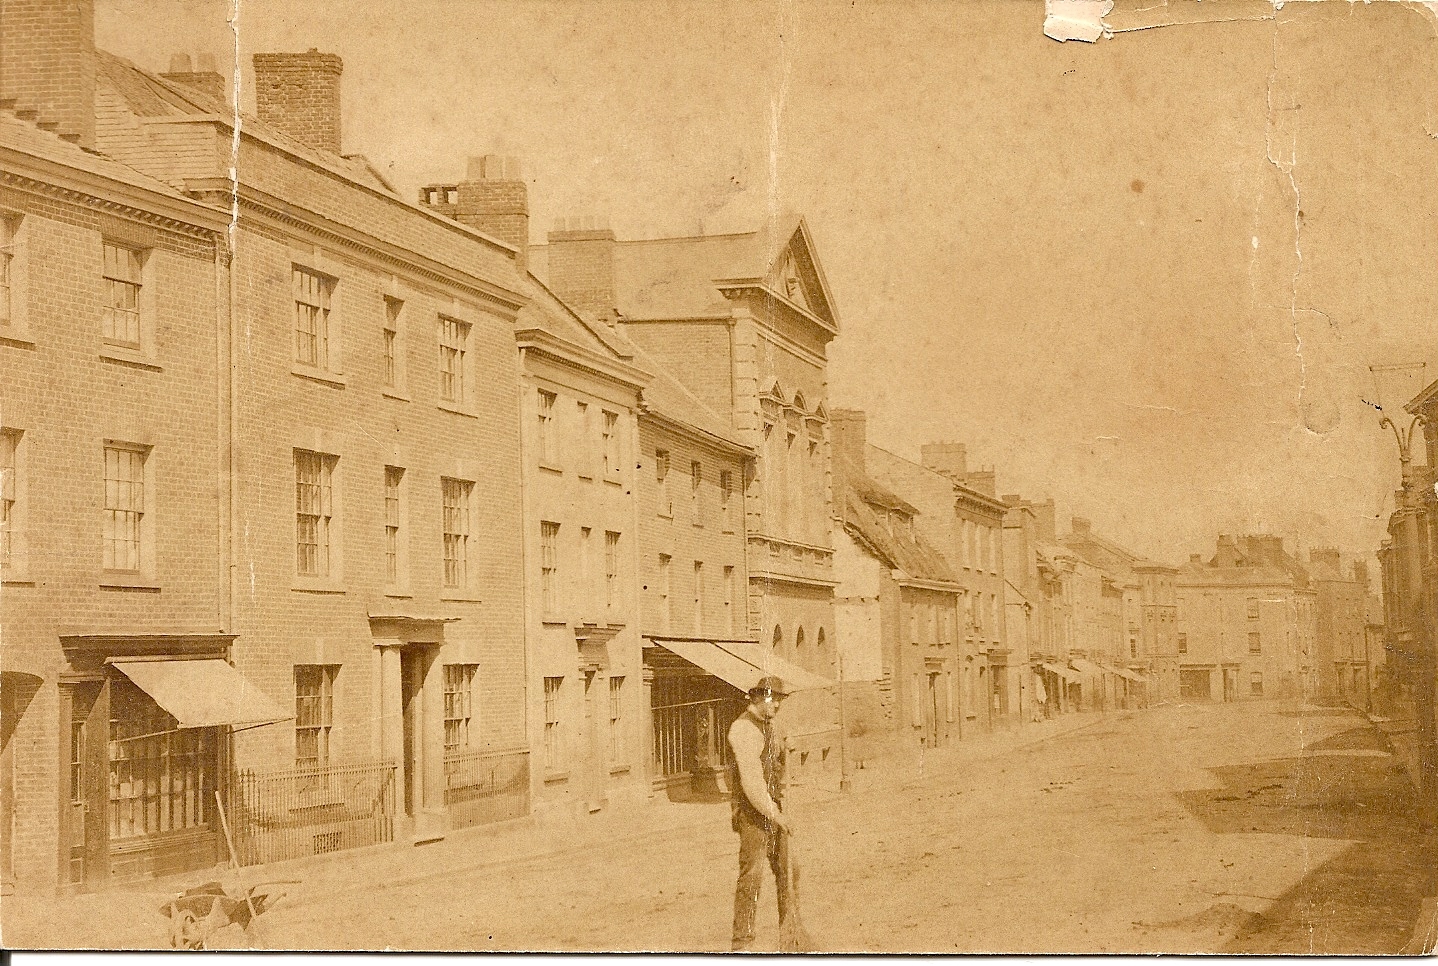 An old black and white photo a brown tint and other signs of age like a tear in one corner. It shows an unpaved road with three storey townhouses. and awnings over shopfronts. There is a wheelbarrow on the left of the image with some tools in and a man standing in the middle of the street holding what looks like a rake. He is wearing a white shirt with a waistcoat over the top and a bowler hat. The photo is recorded as showing Crediton high street around 1900.